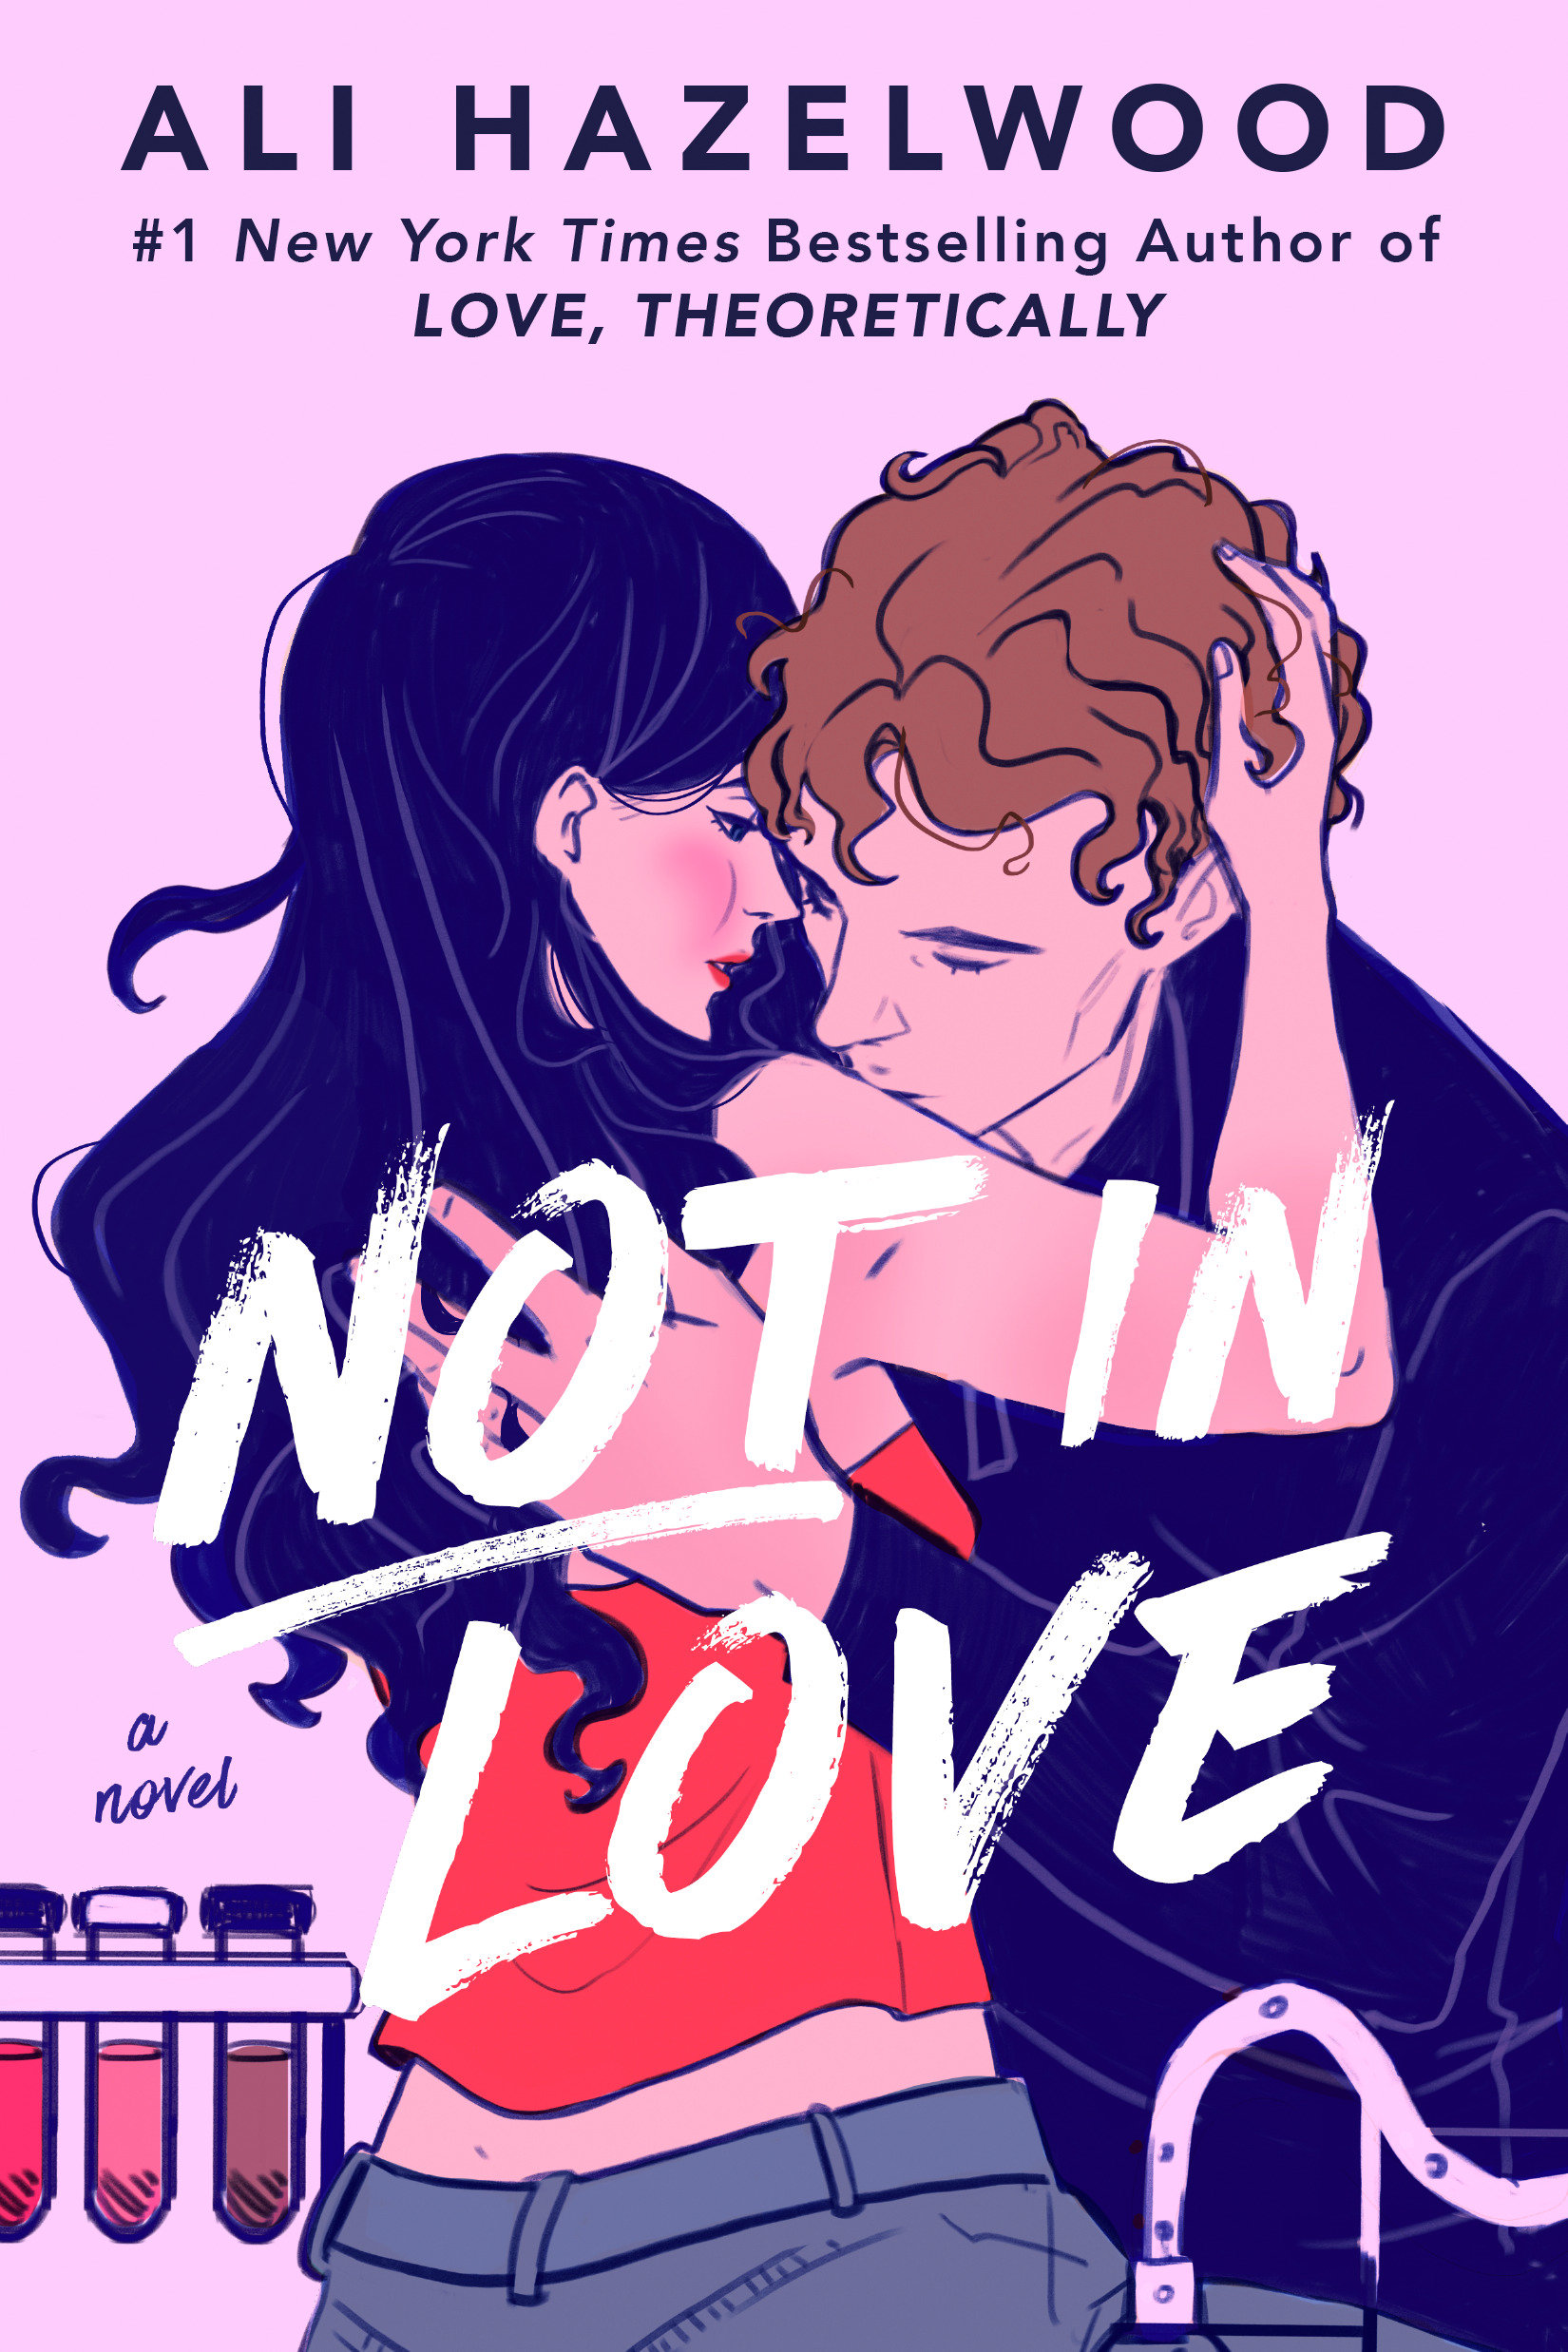 Not in Love cover image